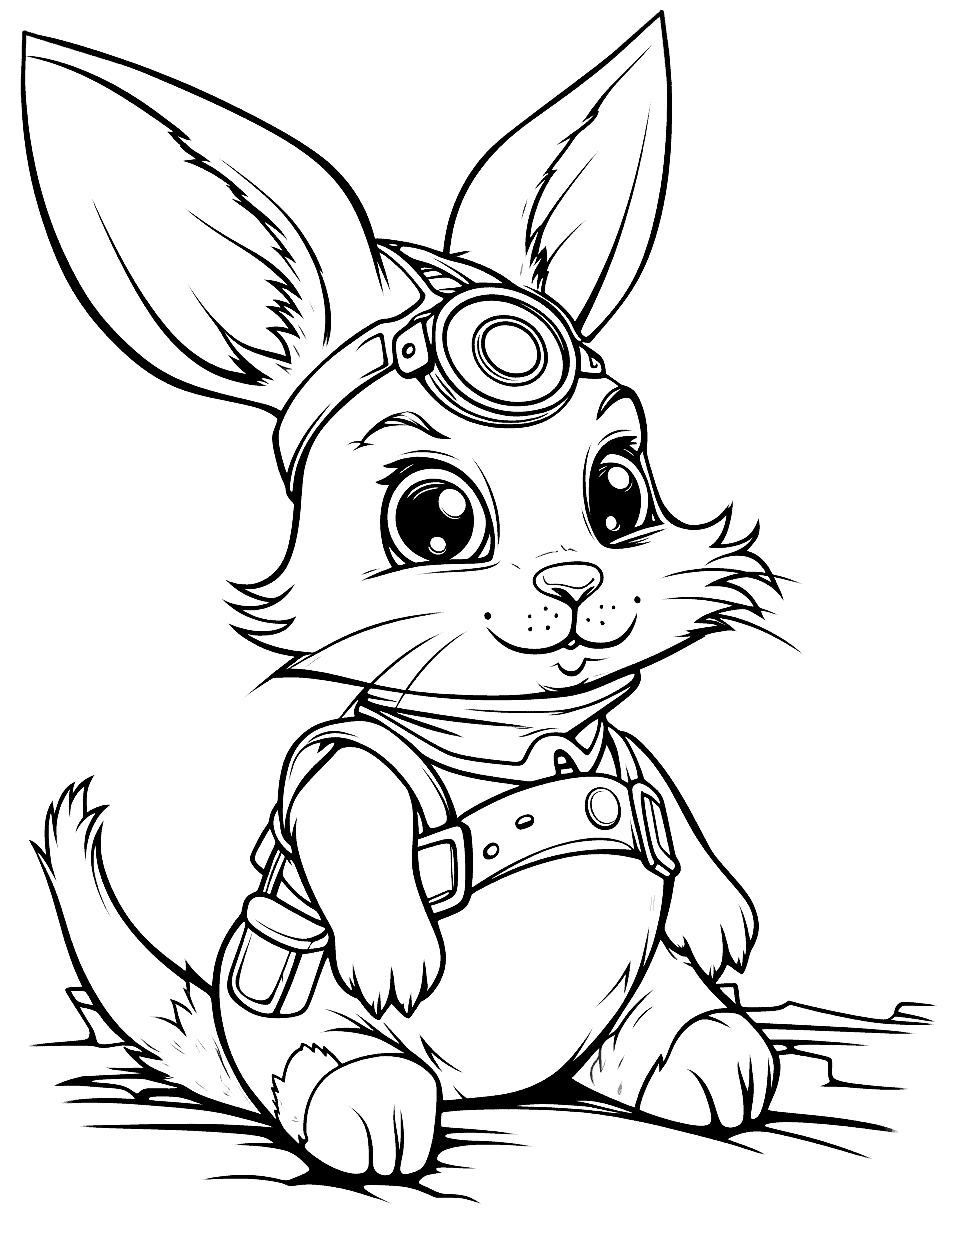 Steampunk Bunny Adventure Coloring Page - Gear up for an industrial fantasy world with our bunny in steampunk attire.